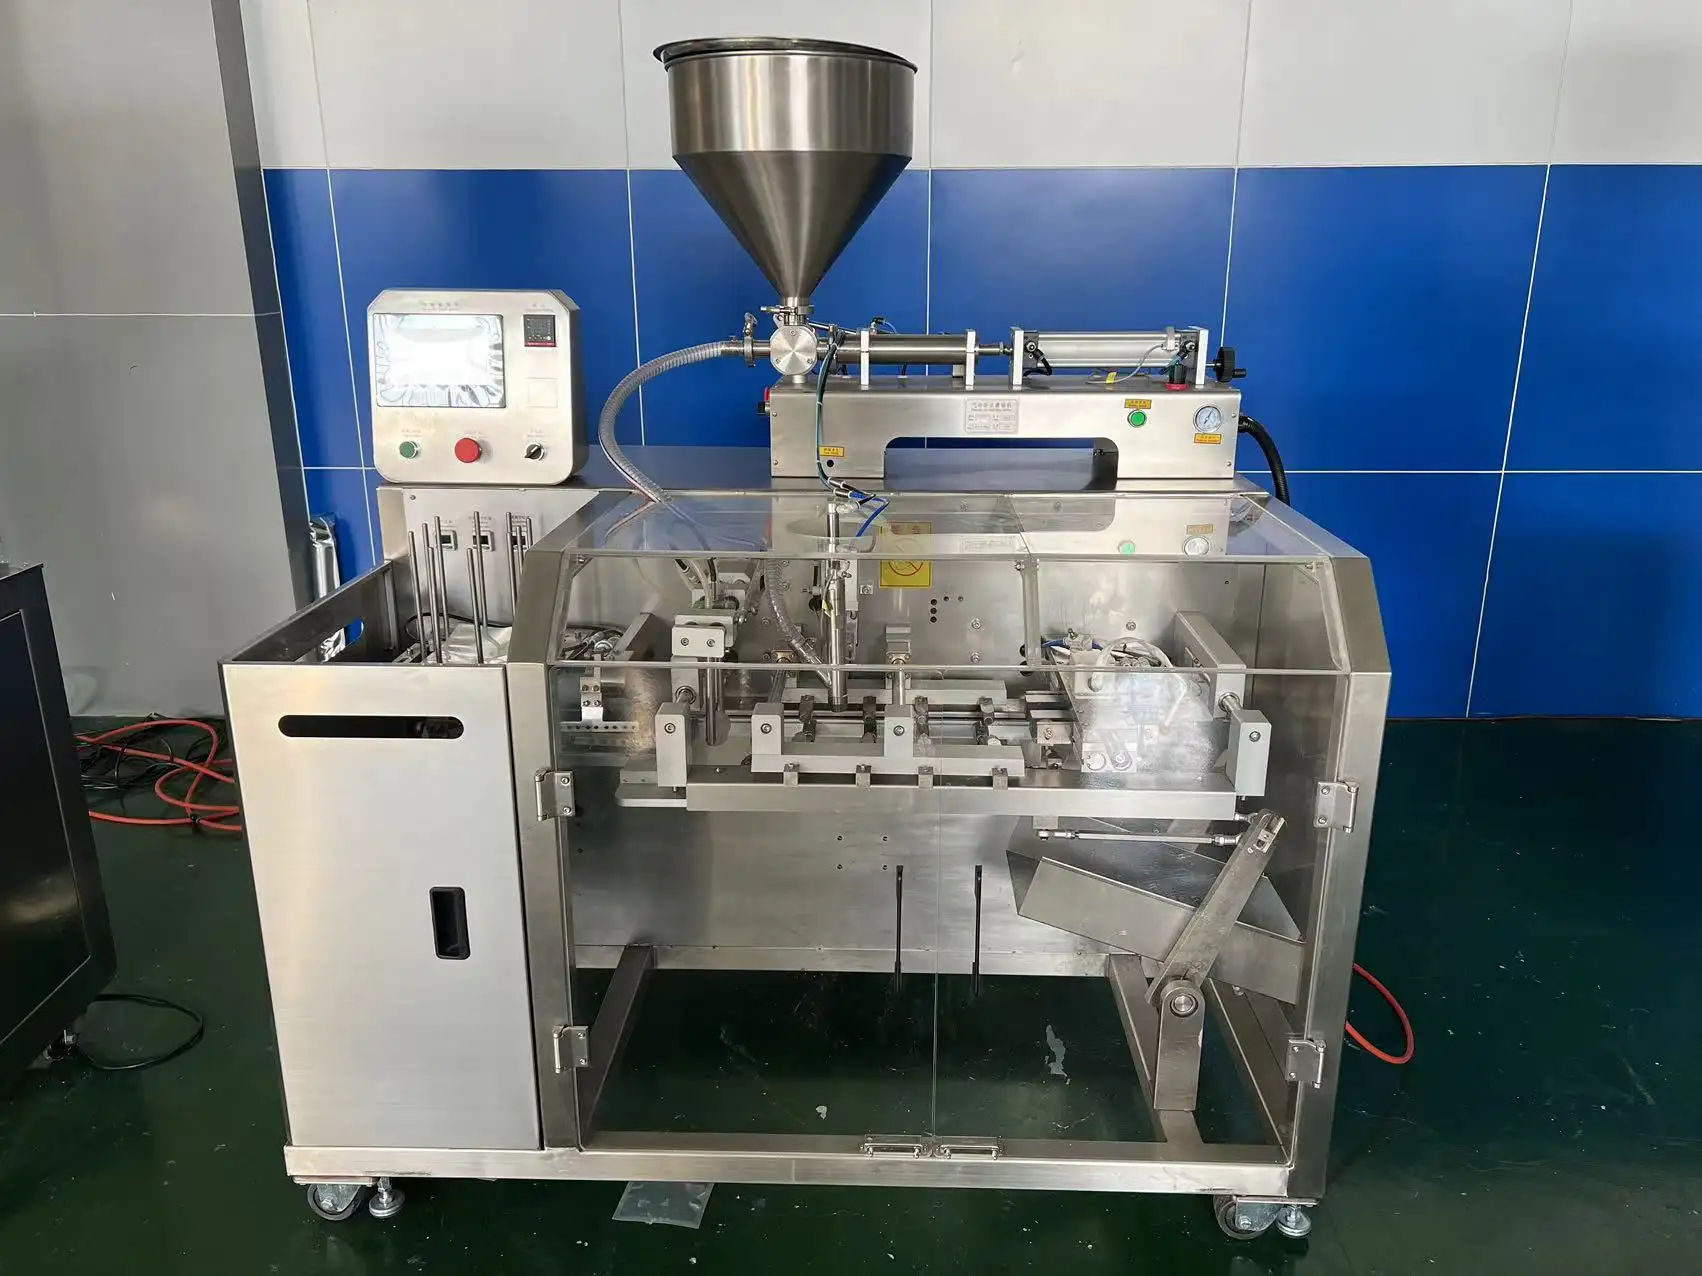 20-200g Automatic Doypack Stand-up pouch Packing Machine Premade Zipper Bag For Granule/Powder/Liquid Mulit function packing